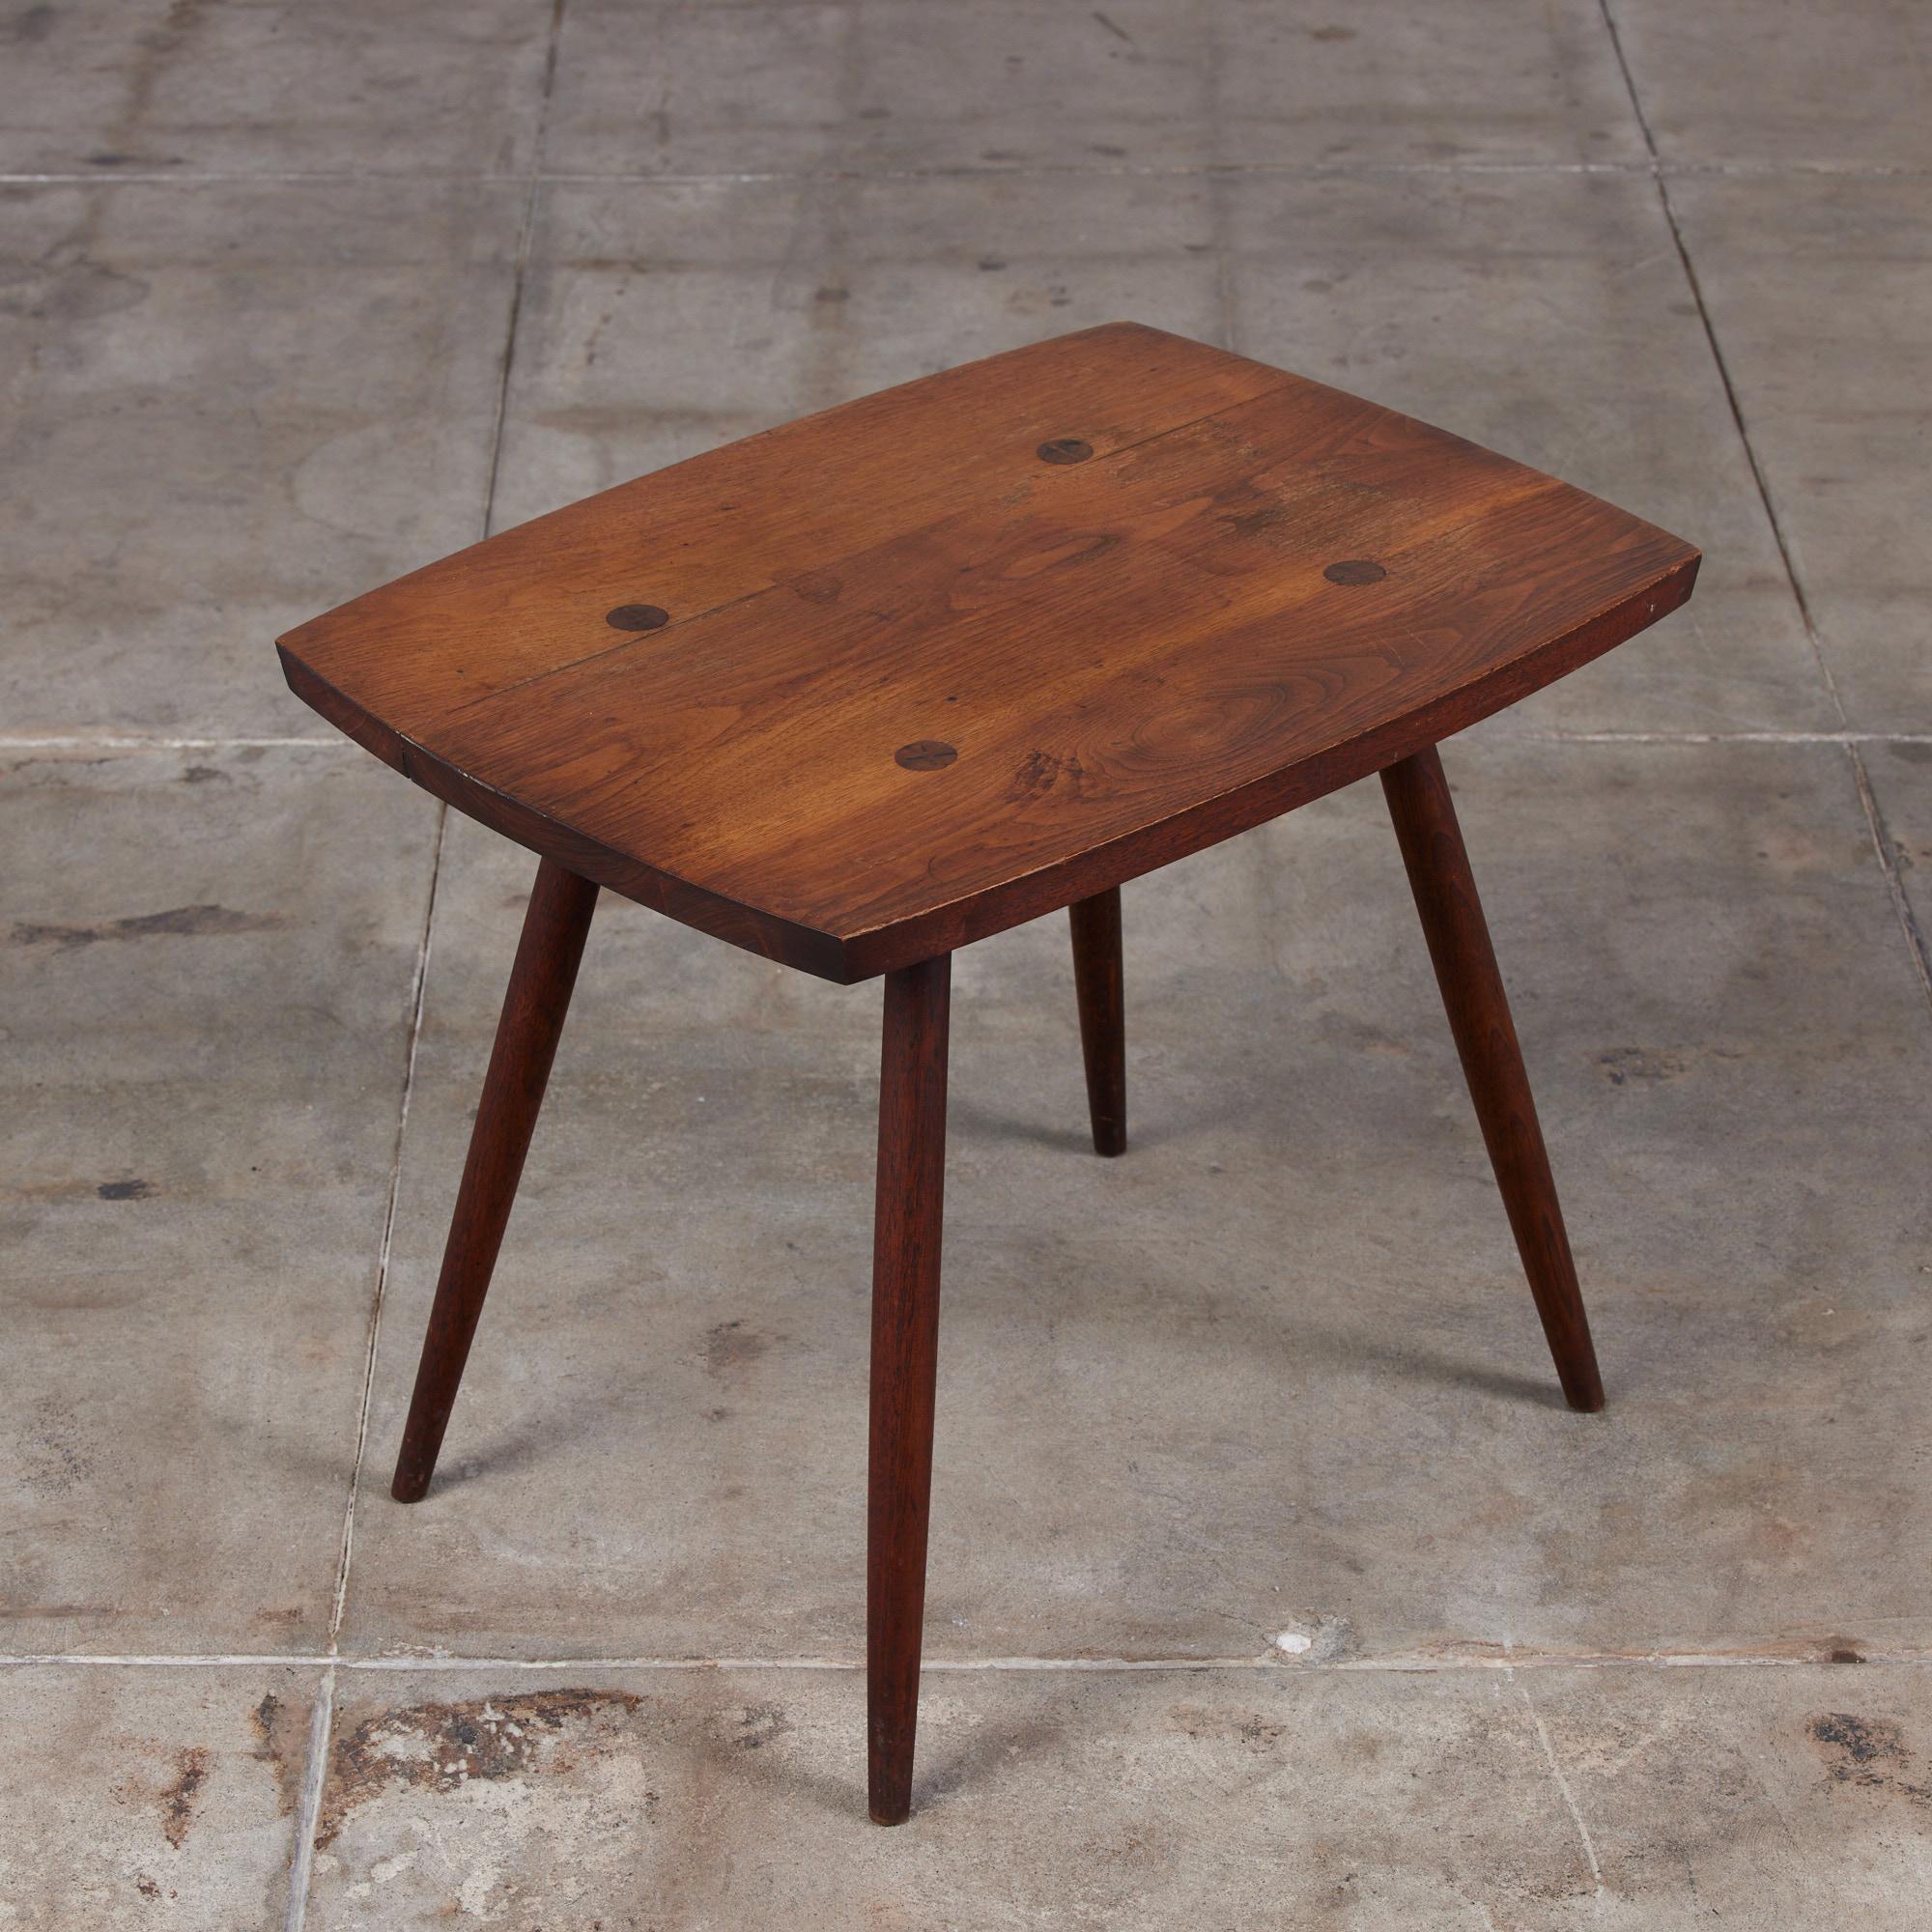 Walnut occasional table from the New Hope, Pennsylvania Studio of George Nakashima. The rectangular table is minimal in design and features long tapered legs.

Dimensions: 24